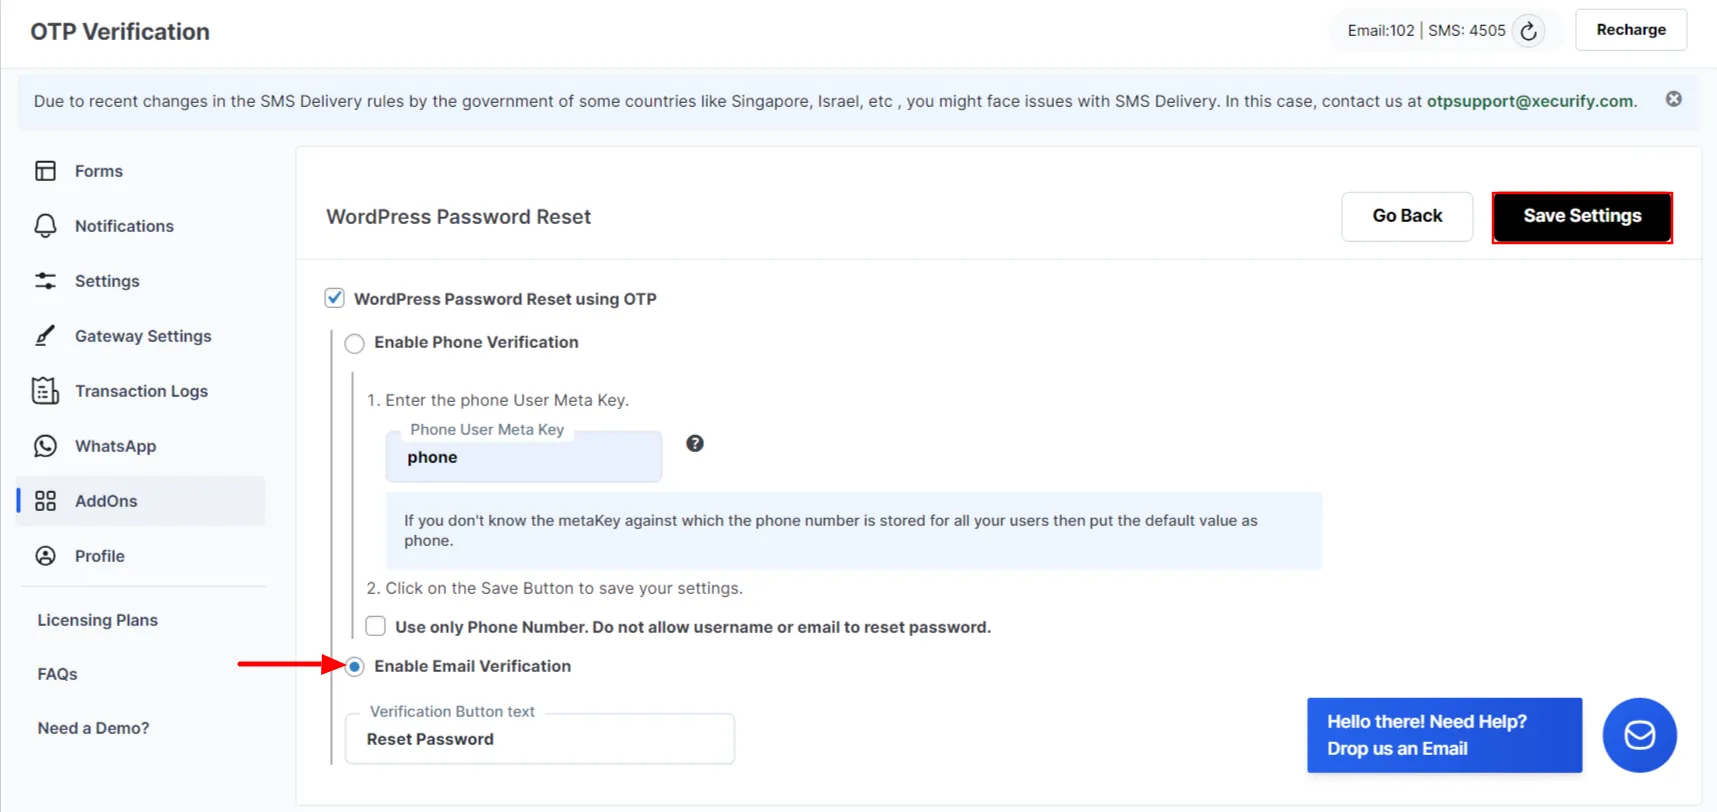 Reset Password OTP - Enable Email Verification